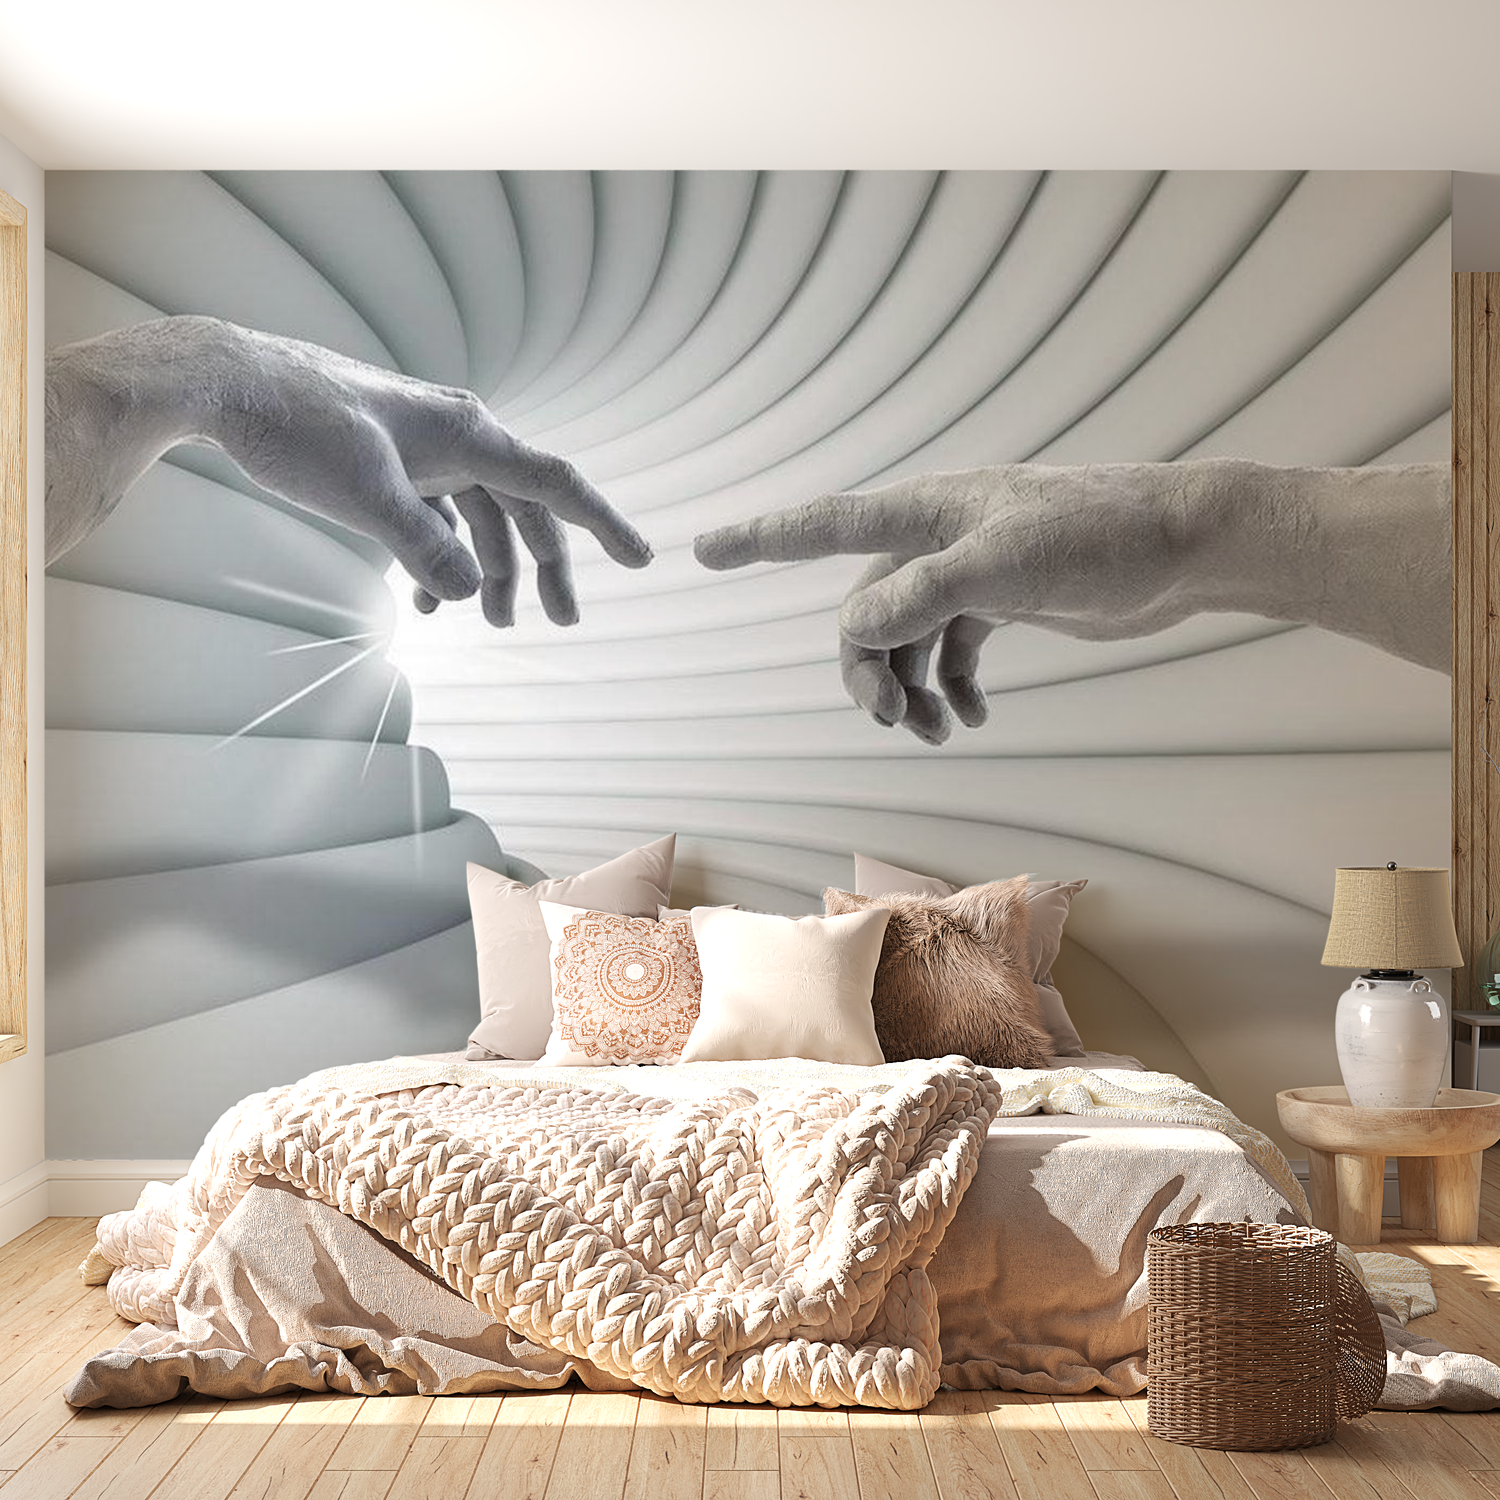 3D Illusion Wallpaper Wall Mural - Touch Of The Light 39"Wx27"H